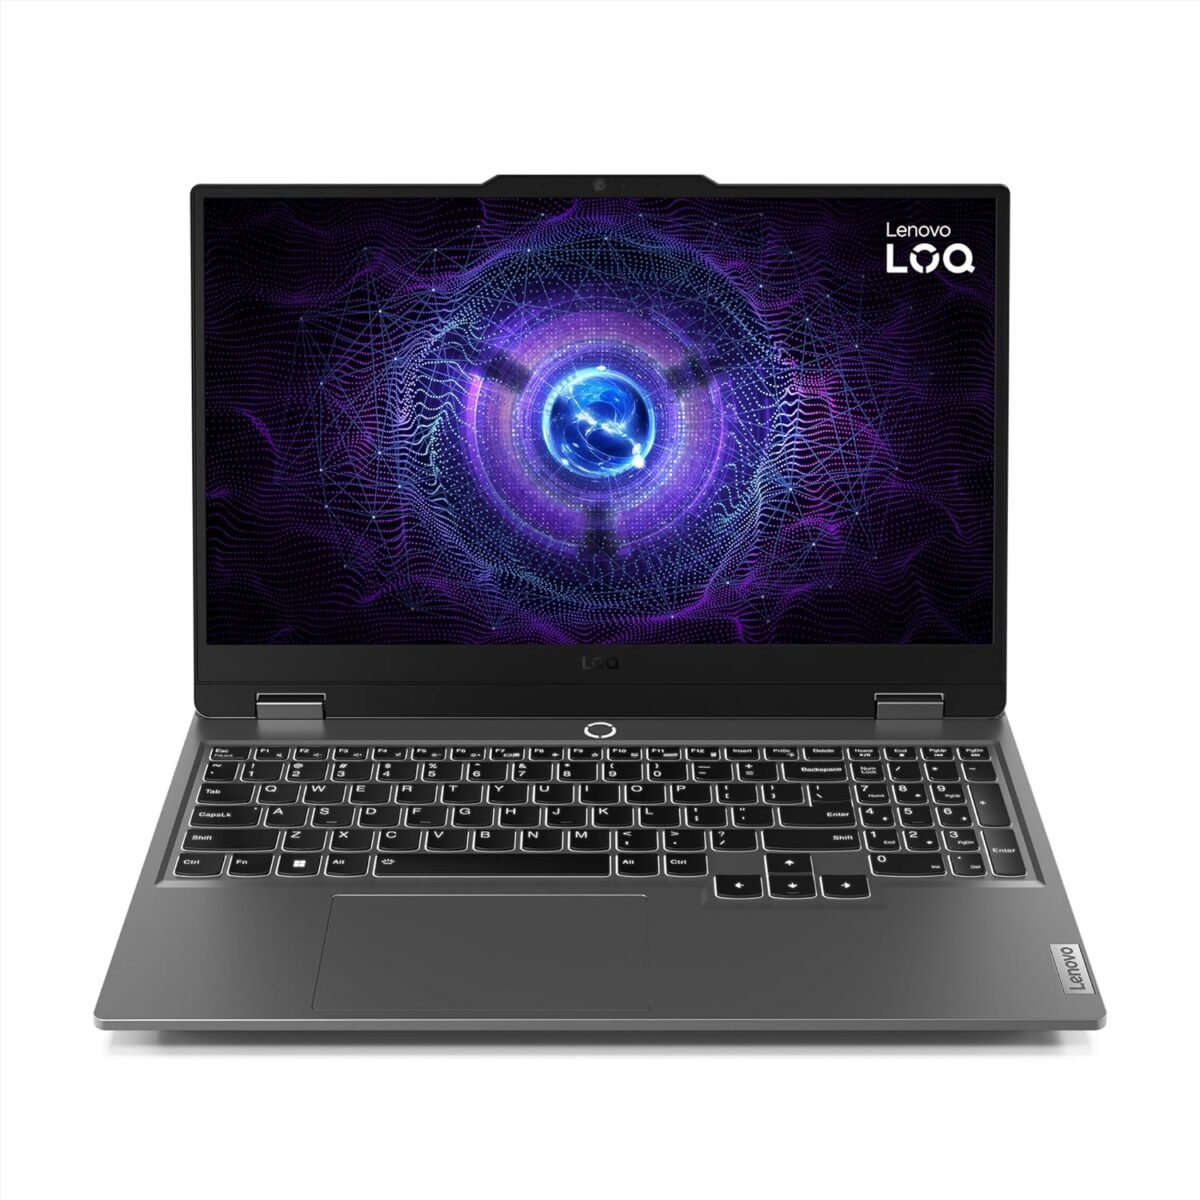 Lenovo LOQ 15IAX9I 83FQ0009IN Gaming Laptop Launched in India ( Intel Core i5-12450HX / Intel Arc A530M / 8GB ram / 512GB SSD )